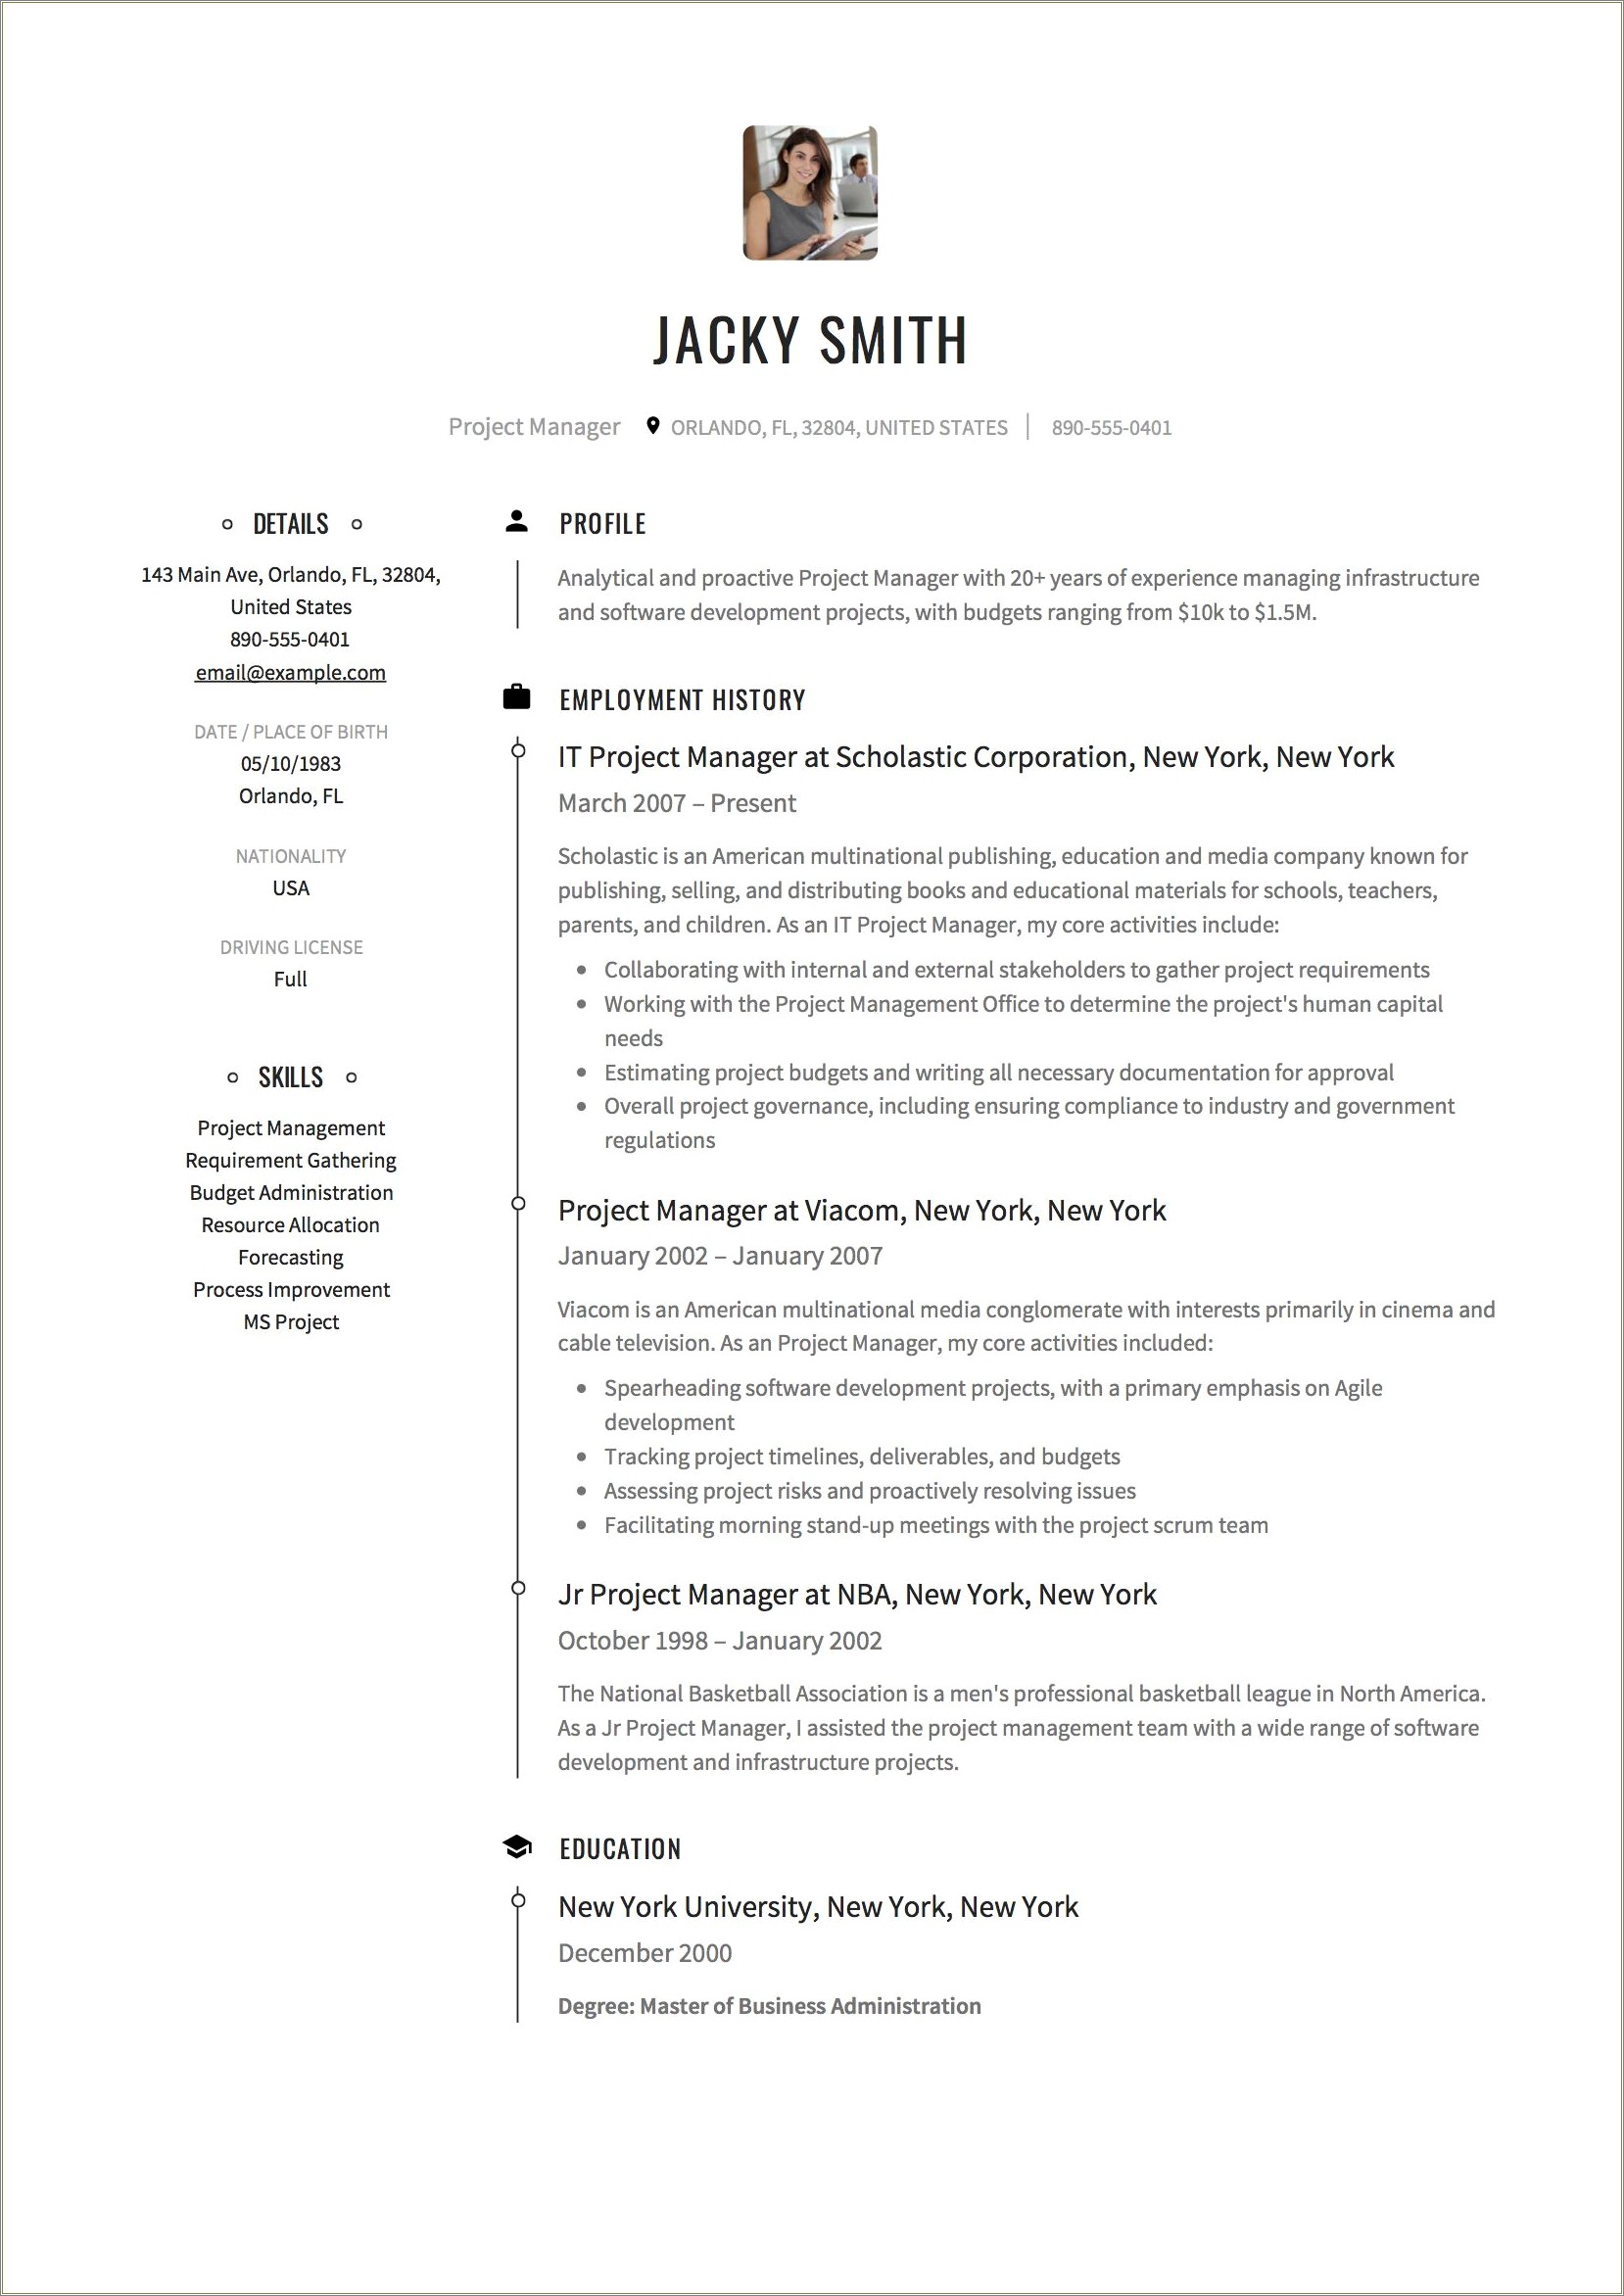 Resume Project Manager Website Personal